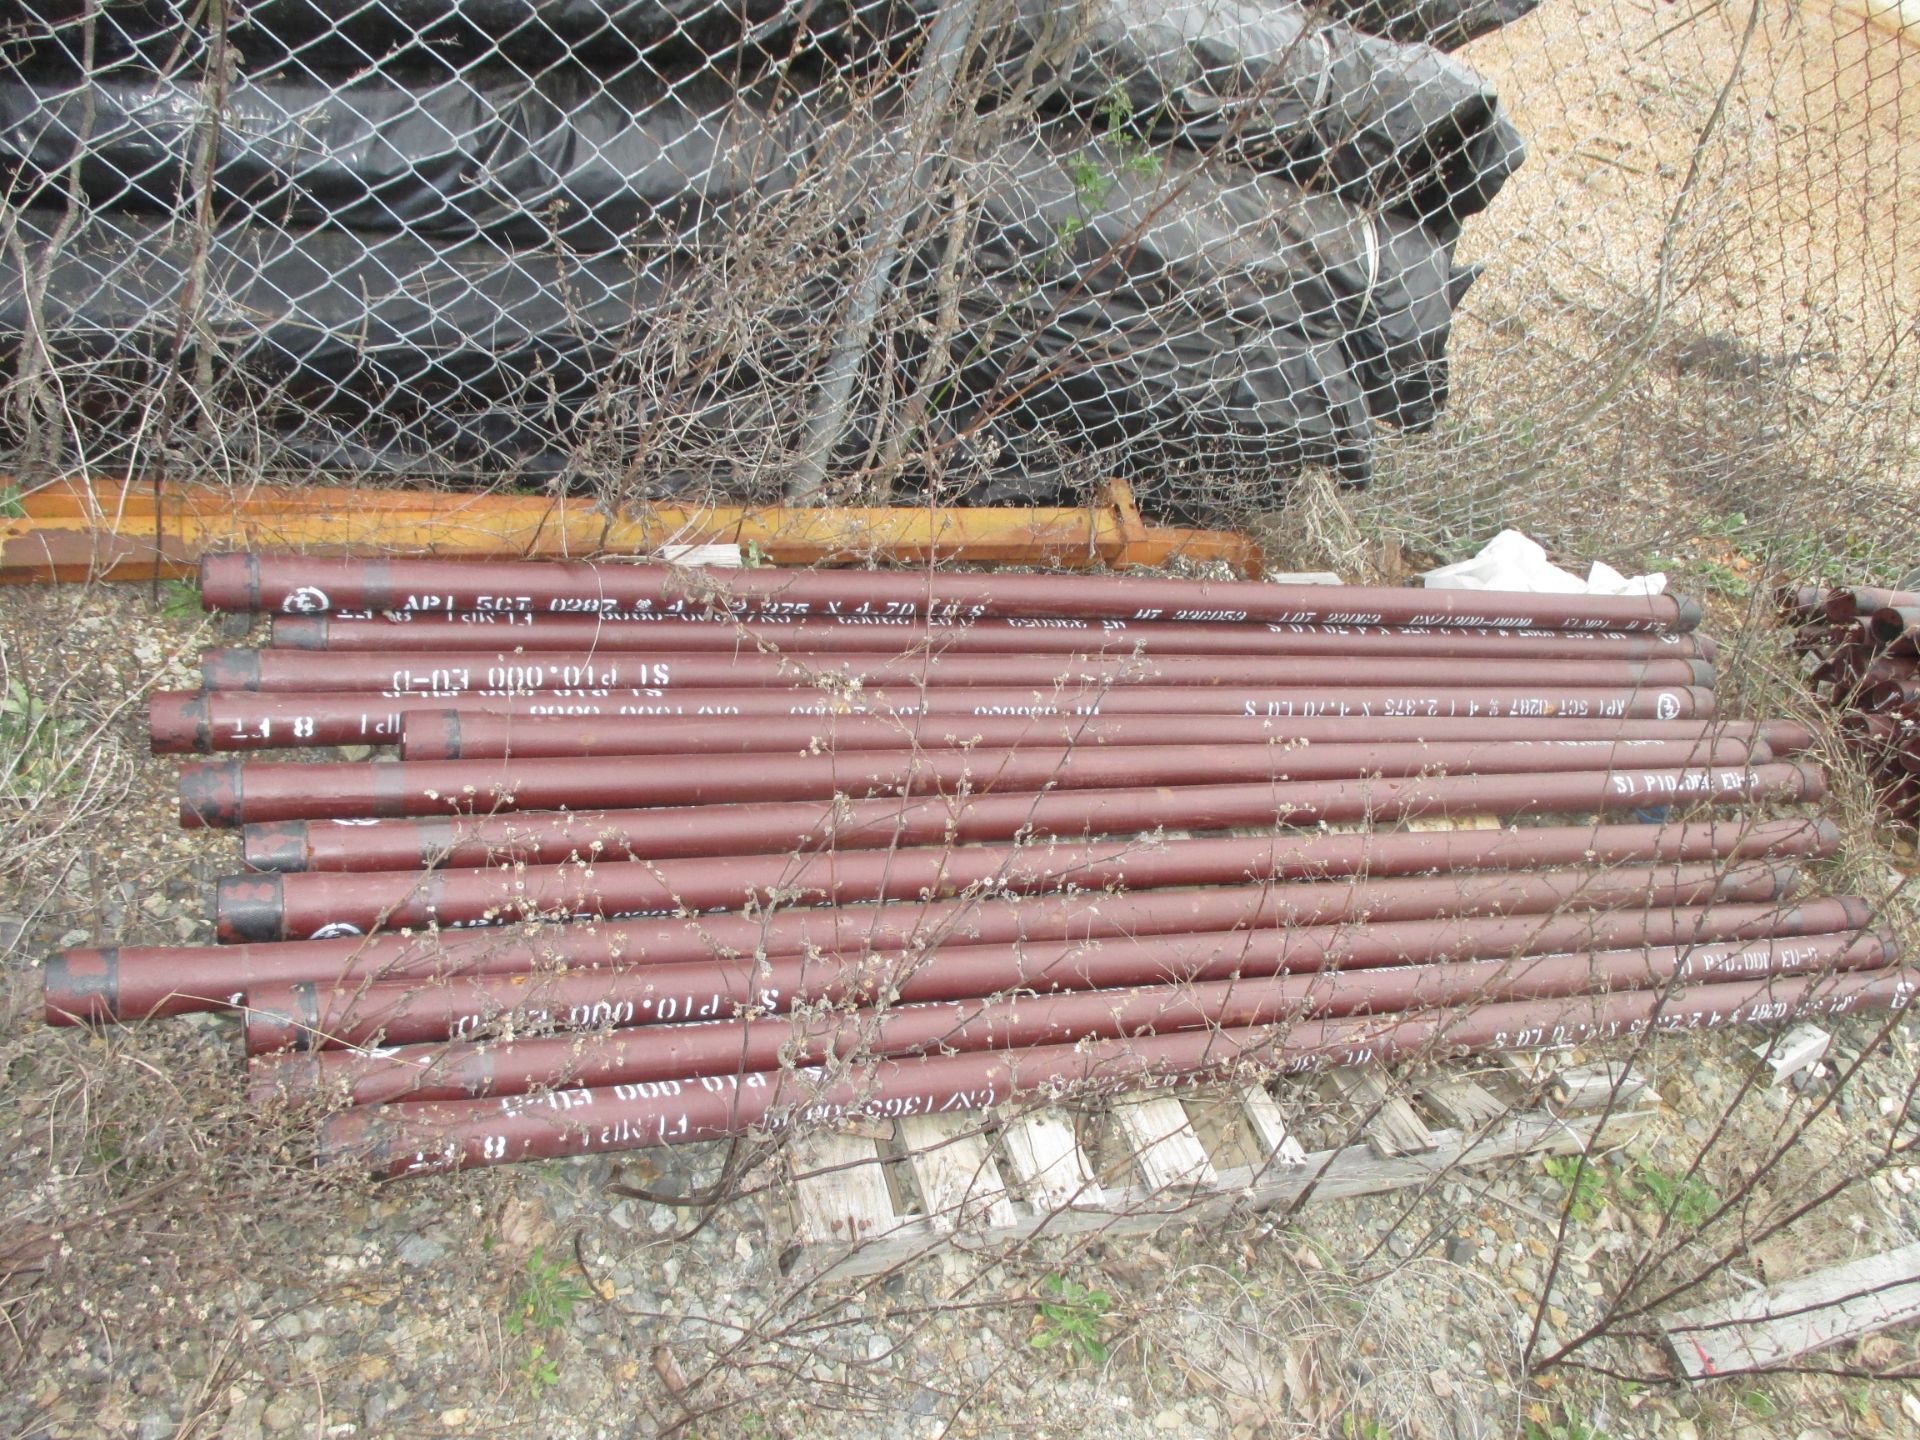 OIL PIPE (LOCATED AT 100 INDUSTRIAL AVE KILGORE TX 75662) - Image 2 of 5